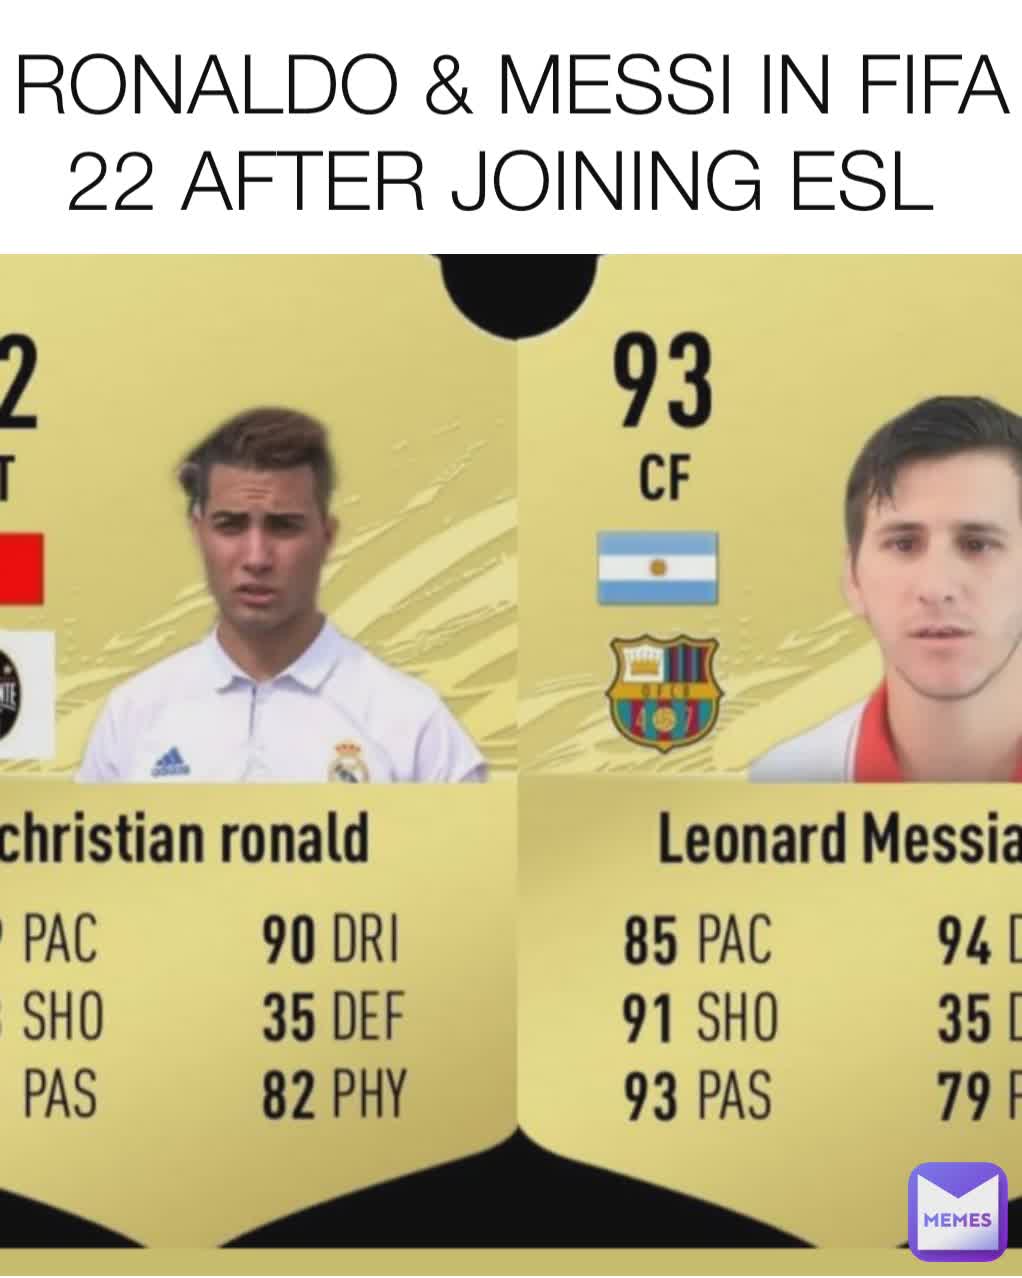 RONALDO & MESSI IN FIFA 22 AFTER JOINING ESL 